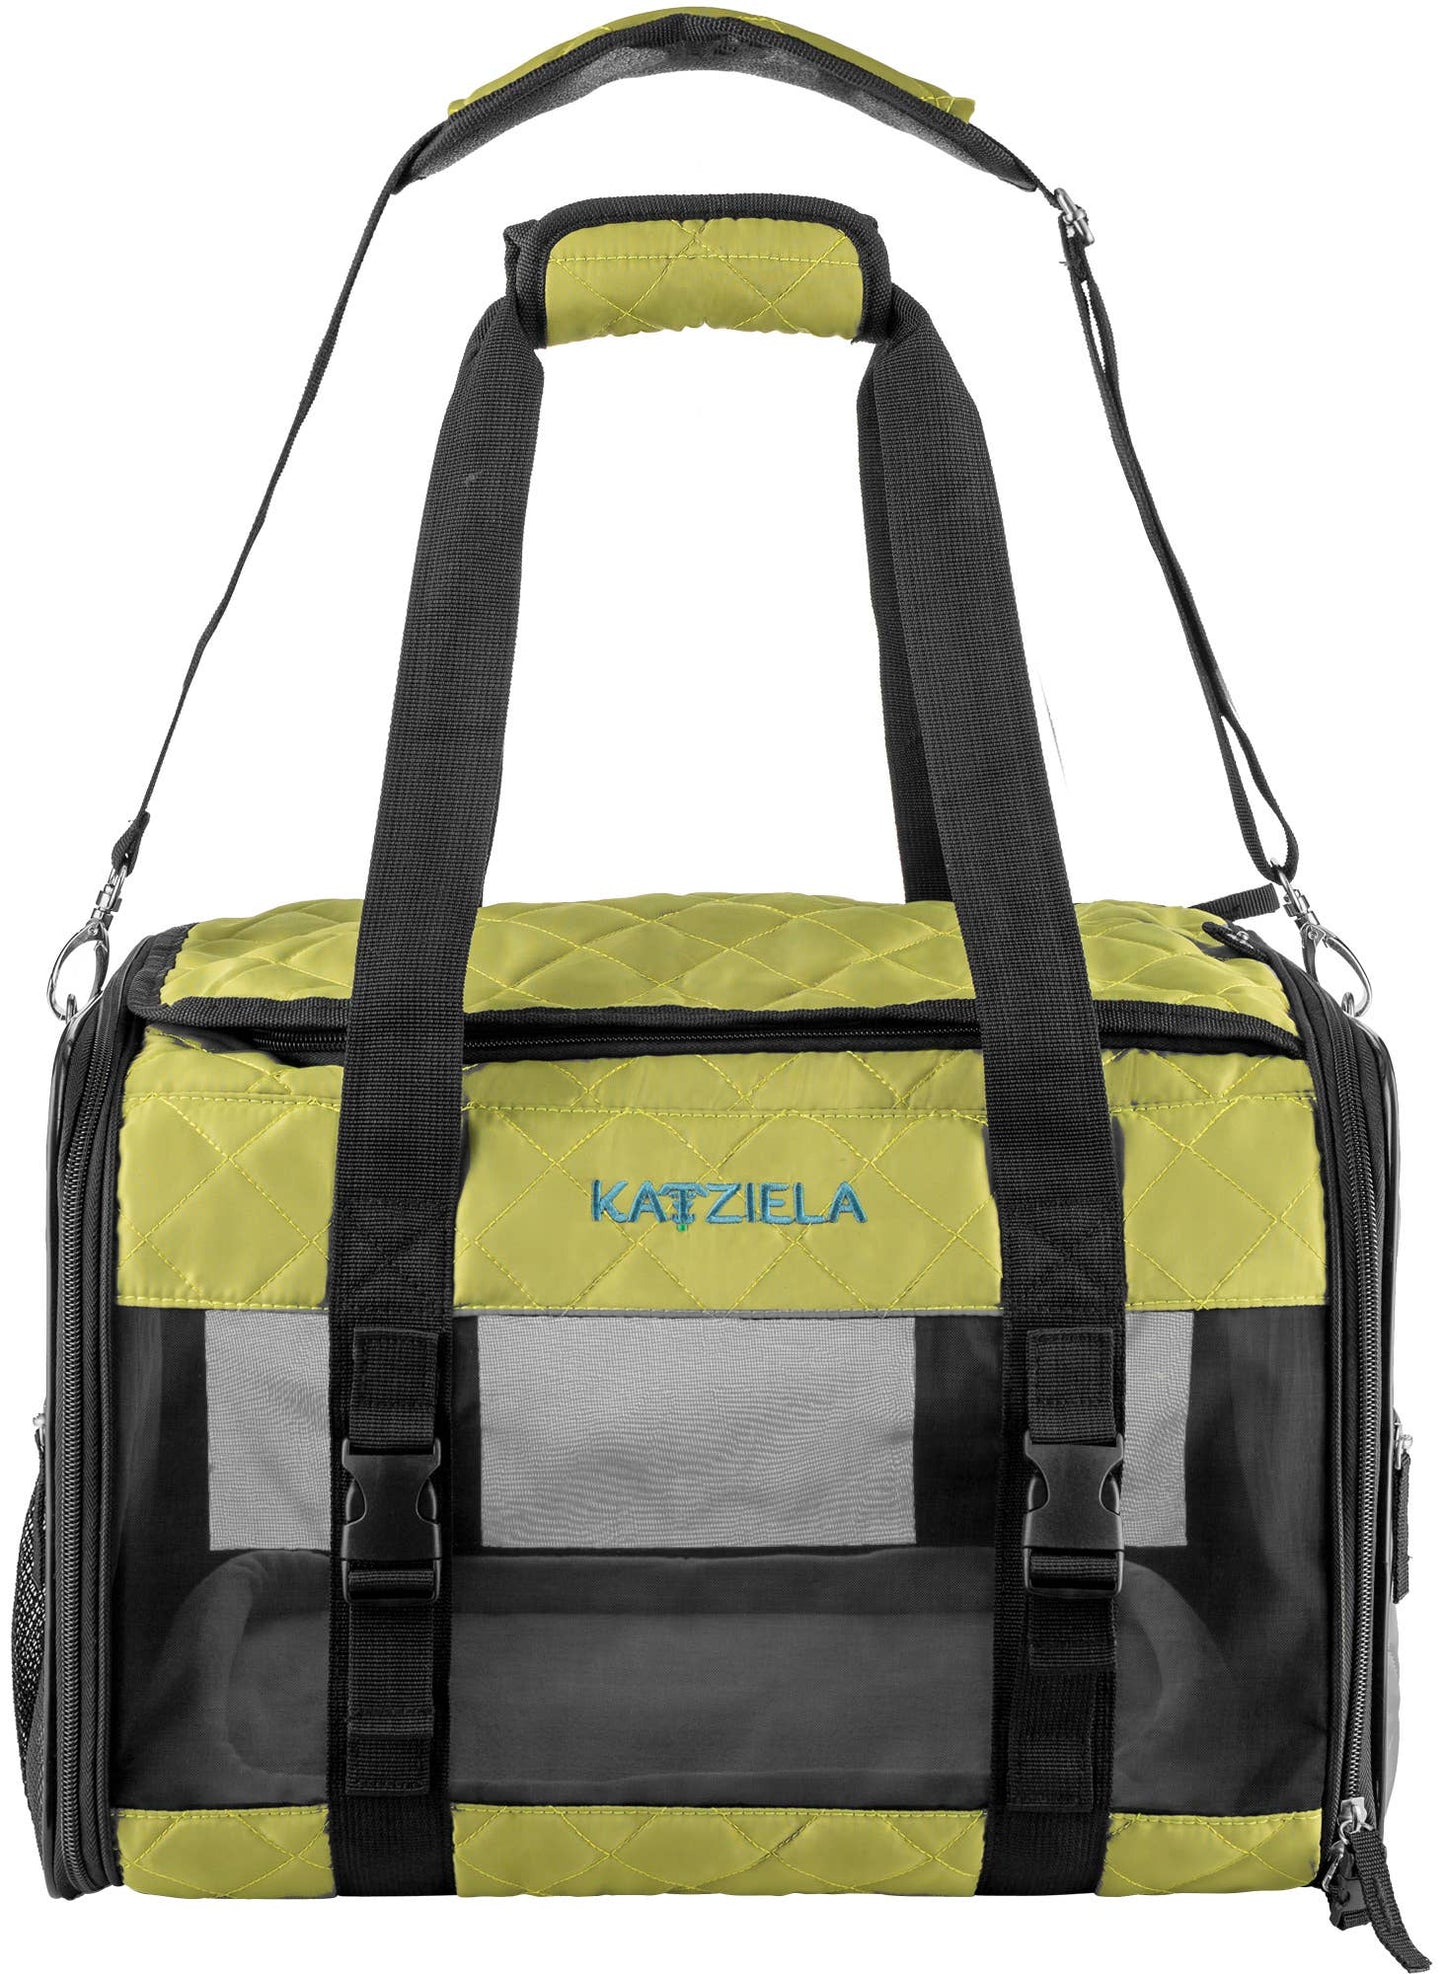 Katziela Quilted Companion Carrier Medium Image